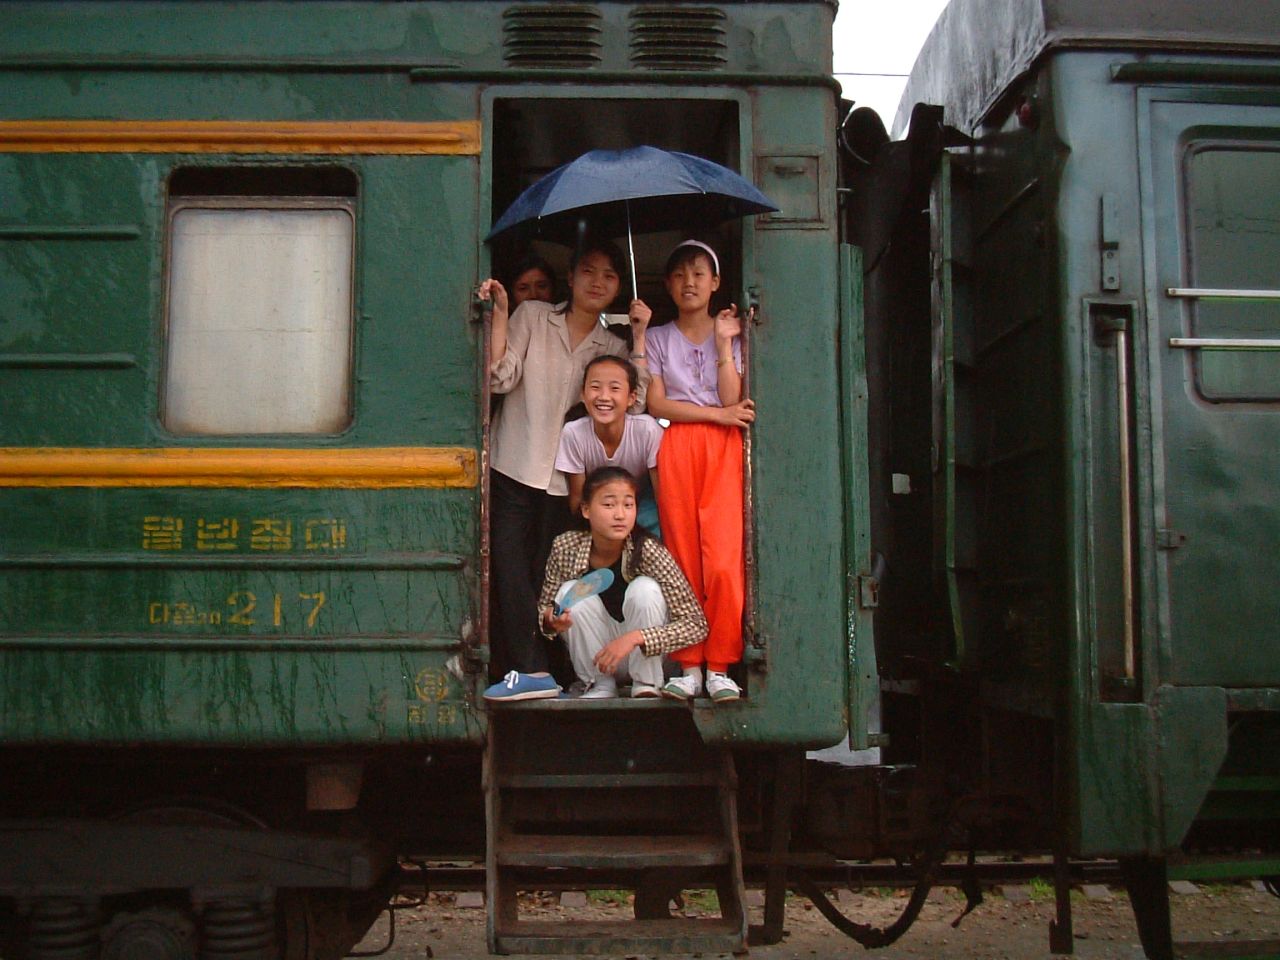 Koryo Tours says it took several years of repeated requests before the North Korean government would grant it permission to run train tours within the country. Previously, foreigners were only allowed to ride the international train service between China and Pyongyang. 